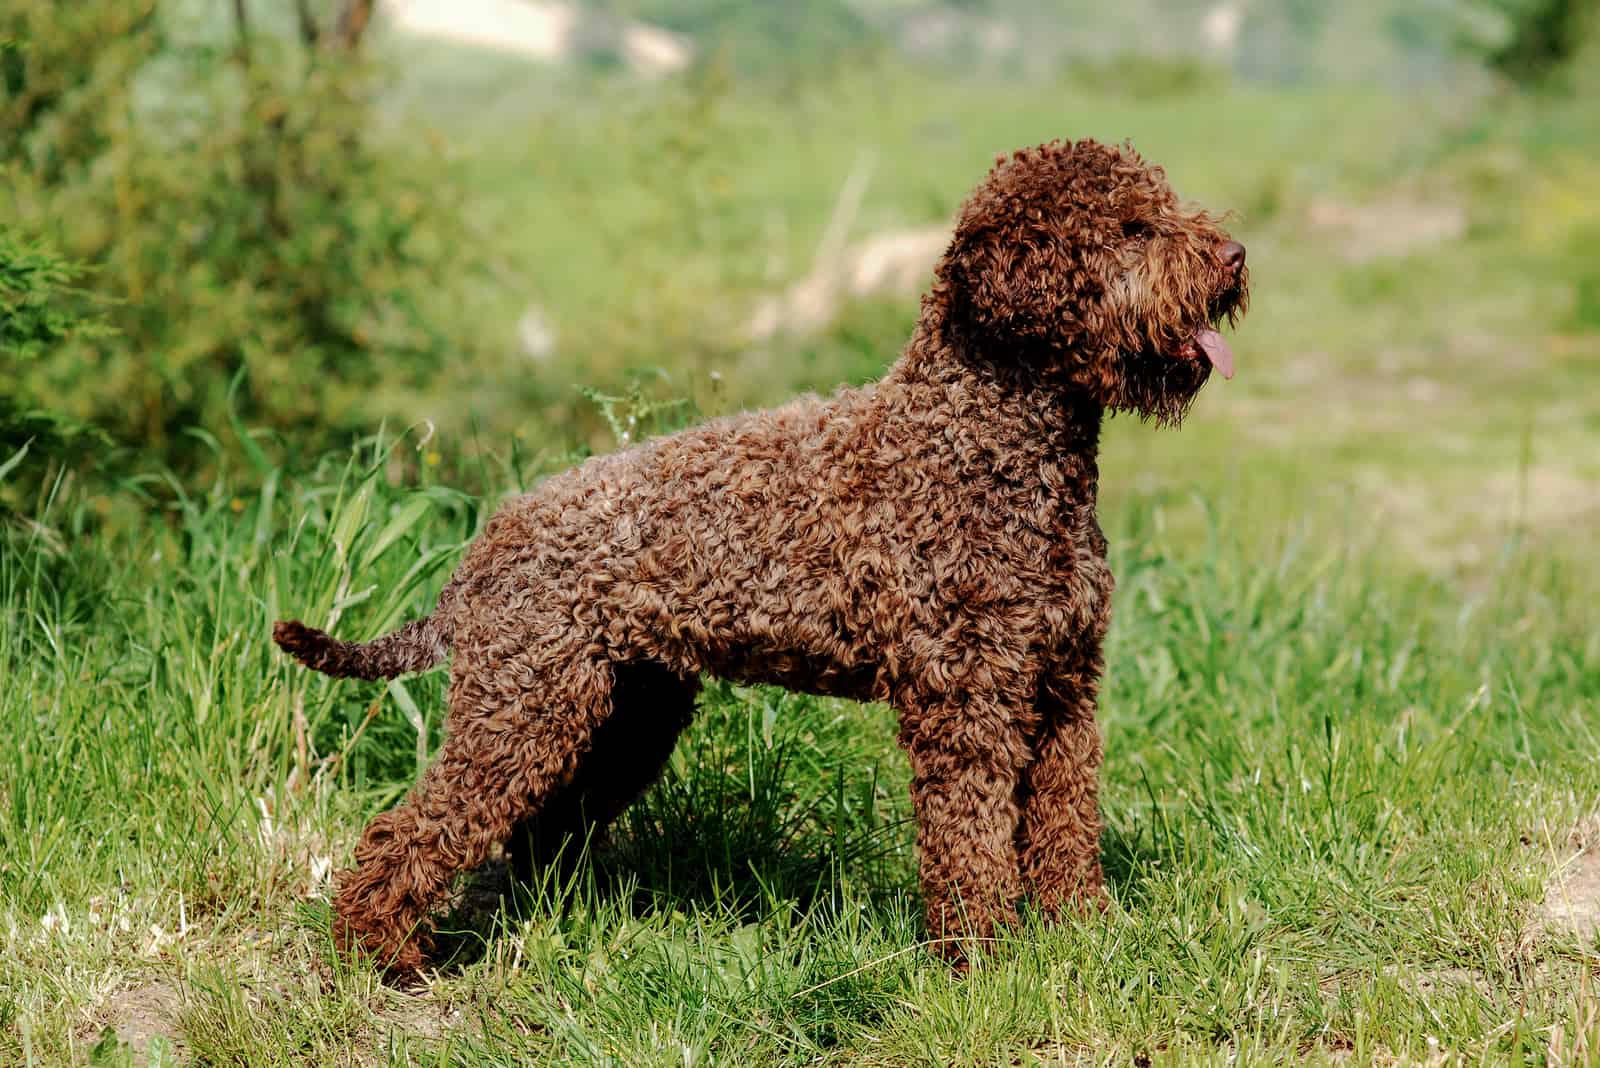 Lagotto Romagnolo standing in the grass